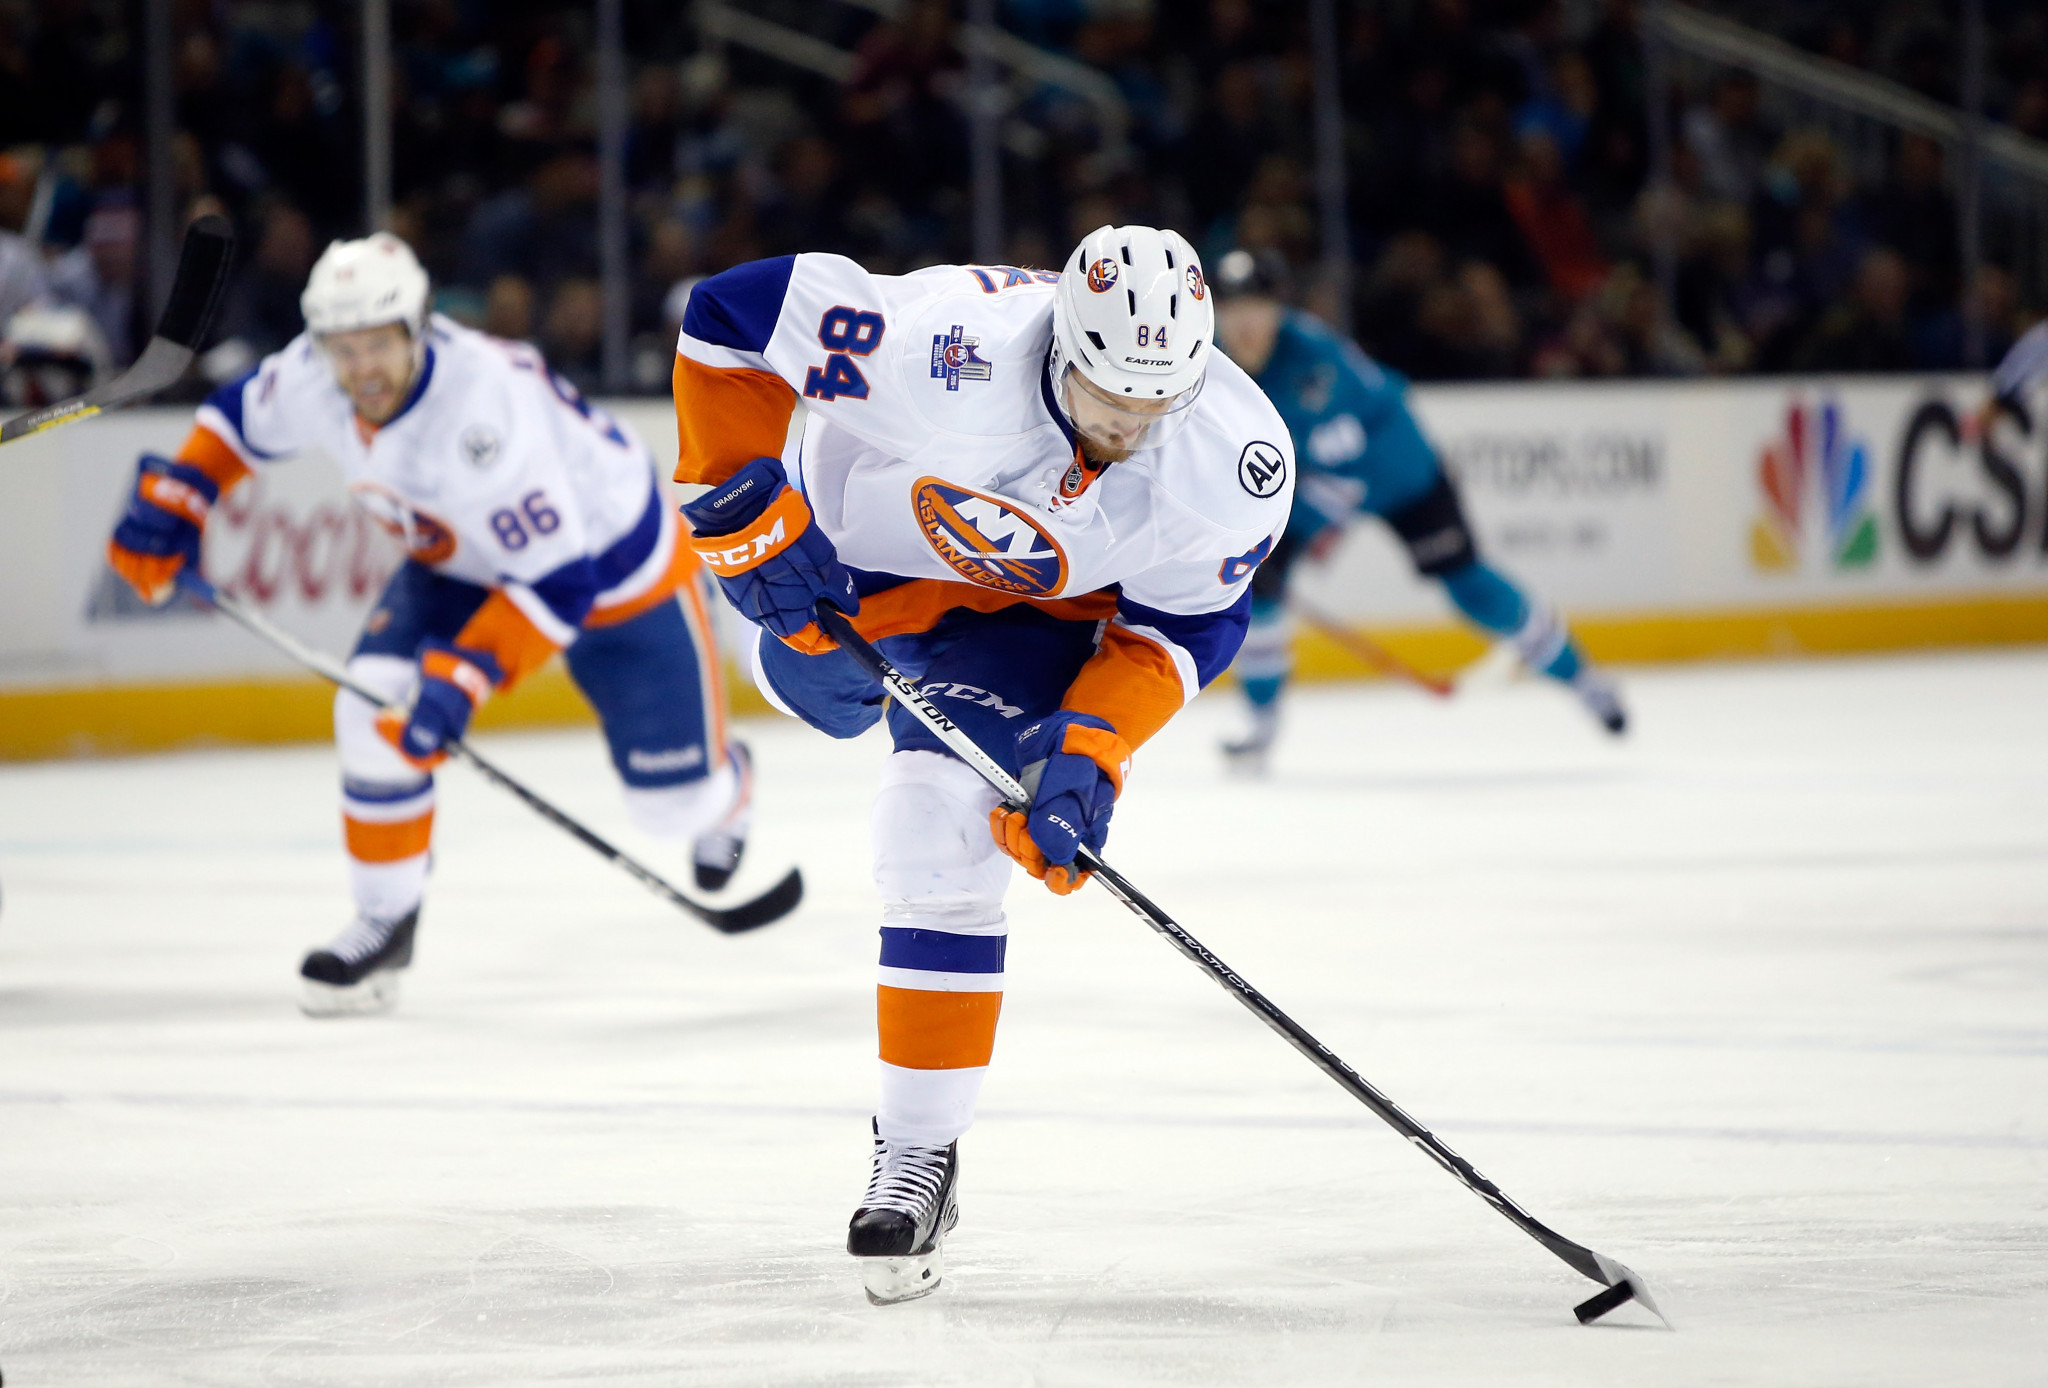 Mikhail Grabovski spent 10 years playing in the NHL, including for the New York Islanders, before returning home to Belarus ©Getty Images